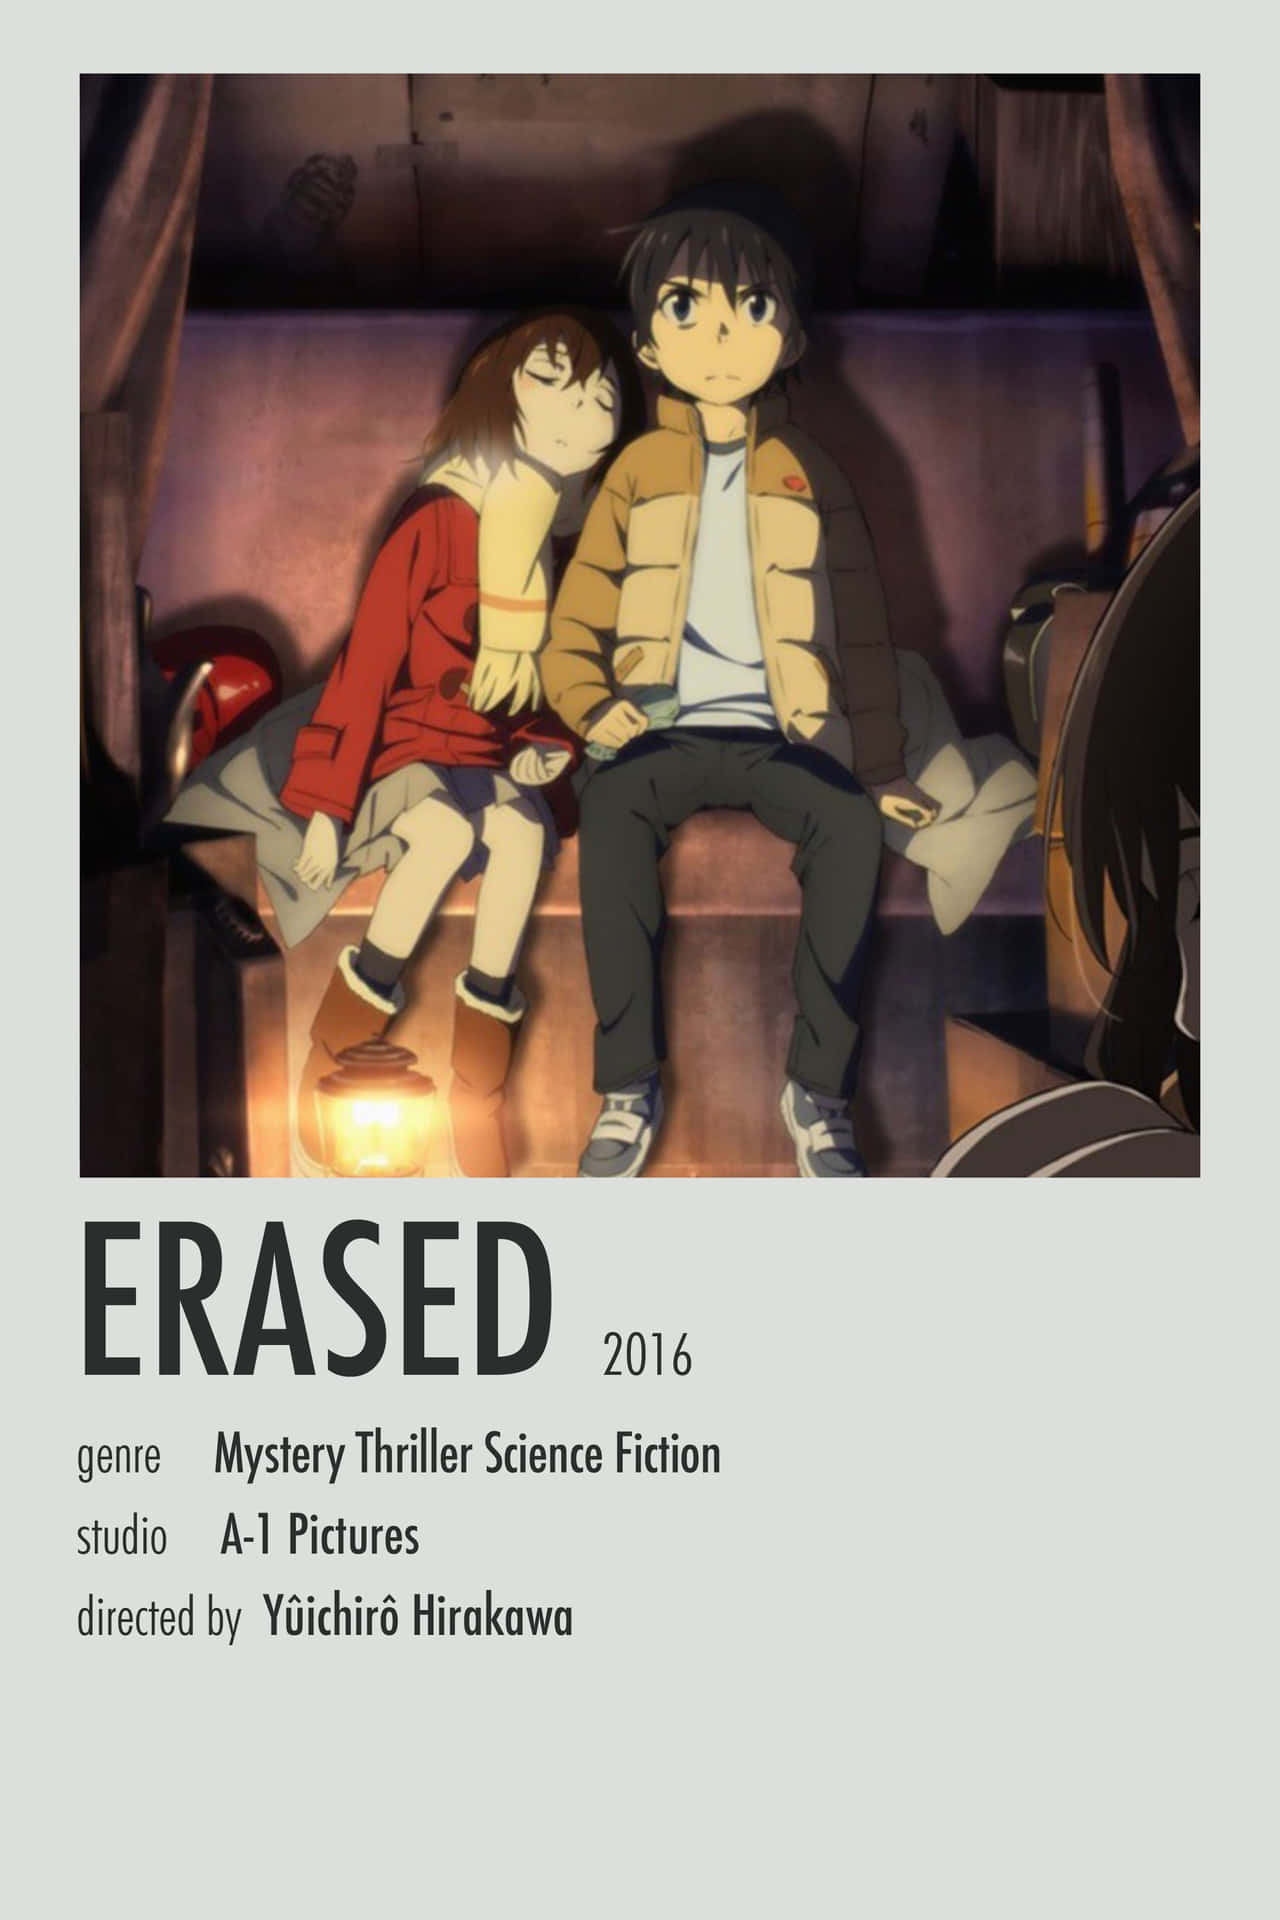 Erased Anime Posters for Sale